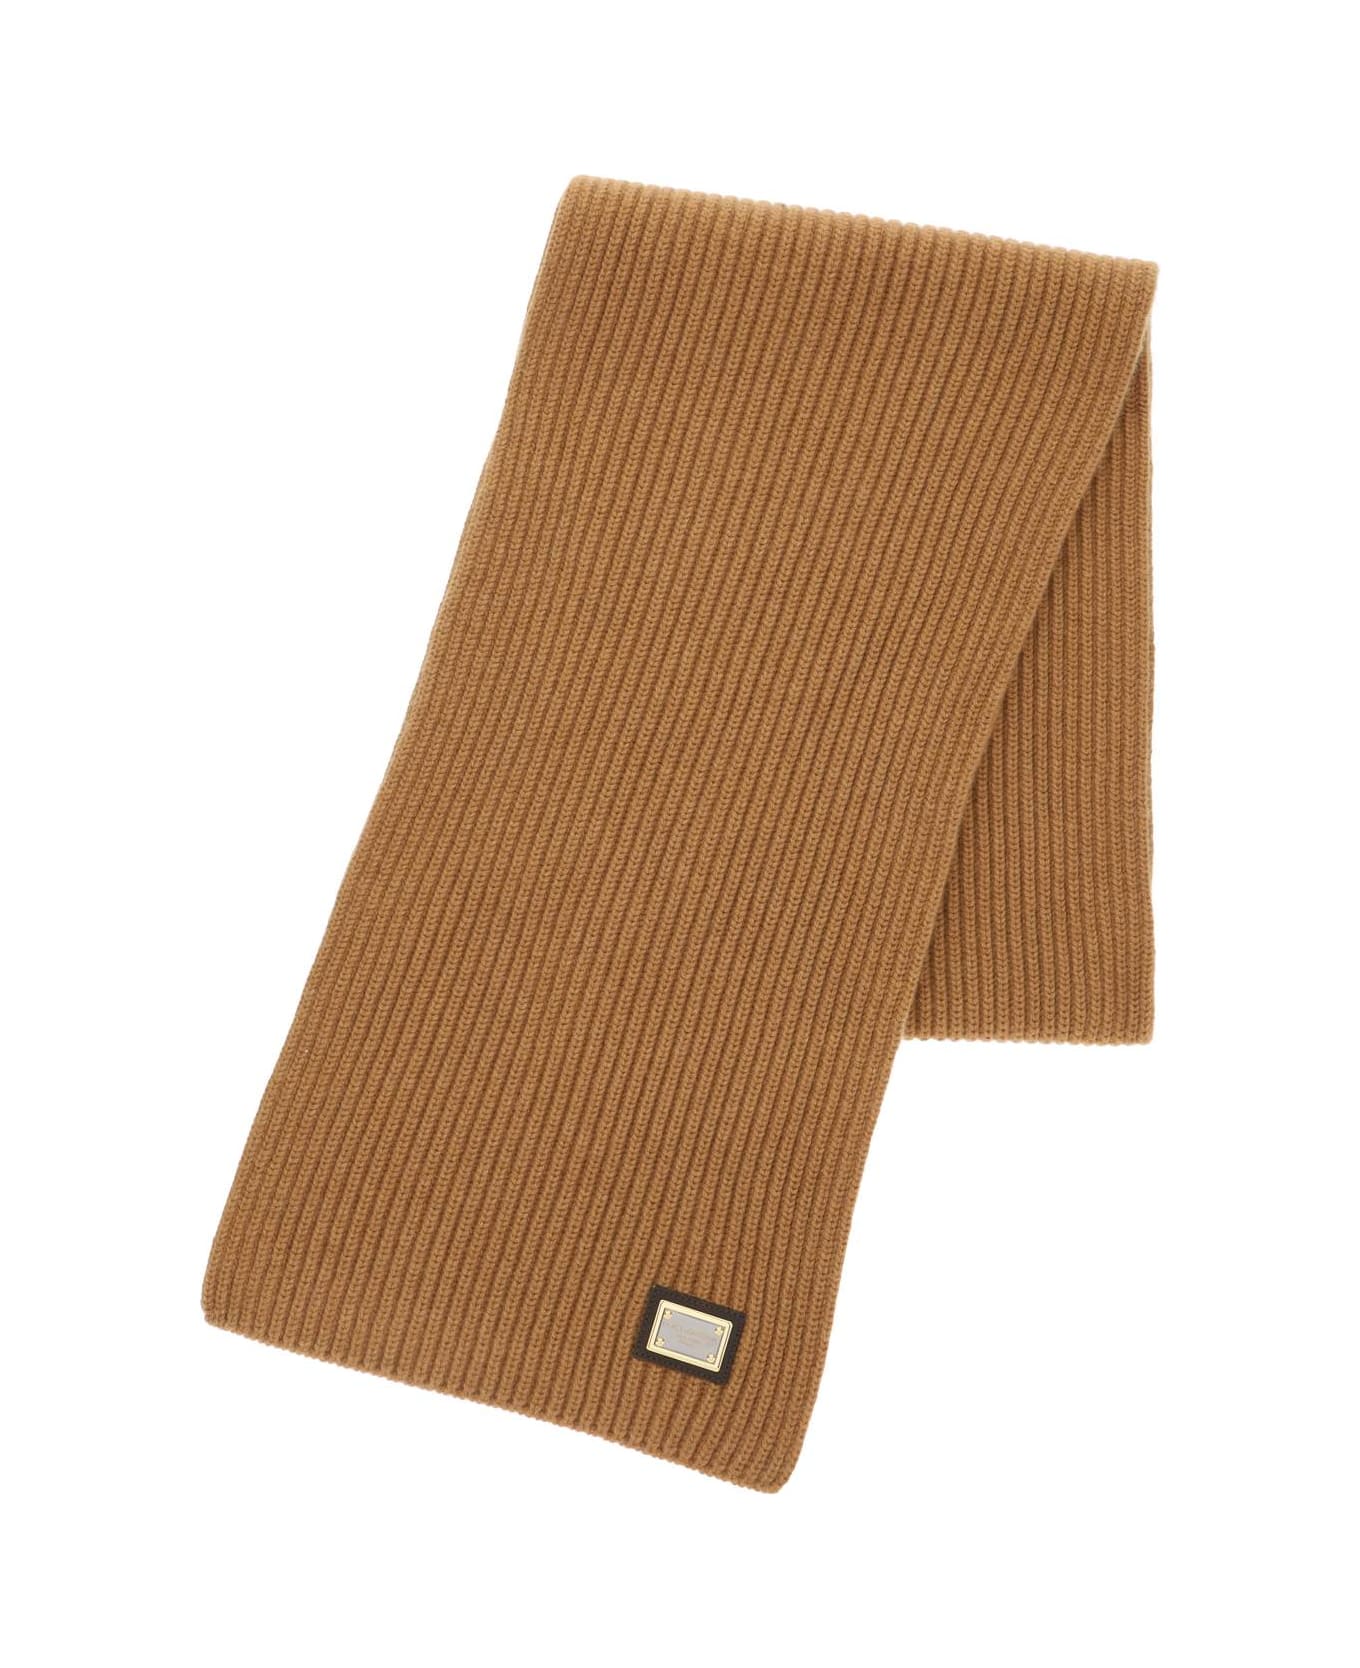 Dolce & Gabbana Ribbed Cashmere Scarf - NOCE (Brown)